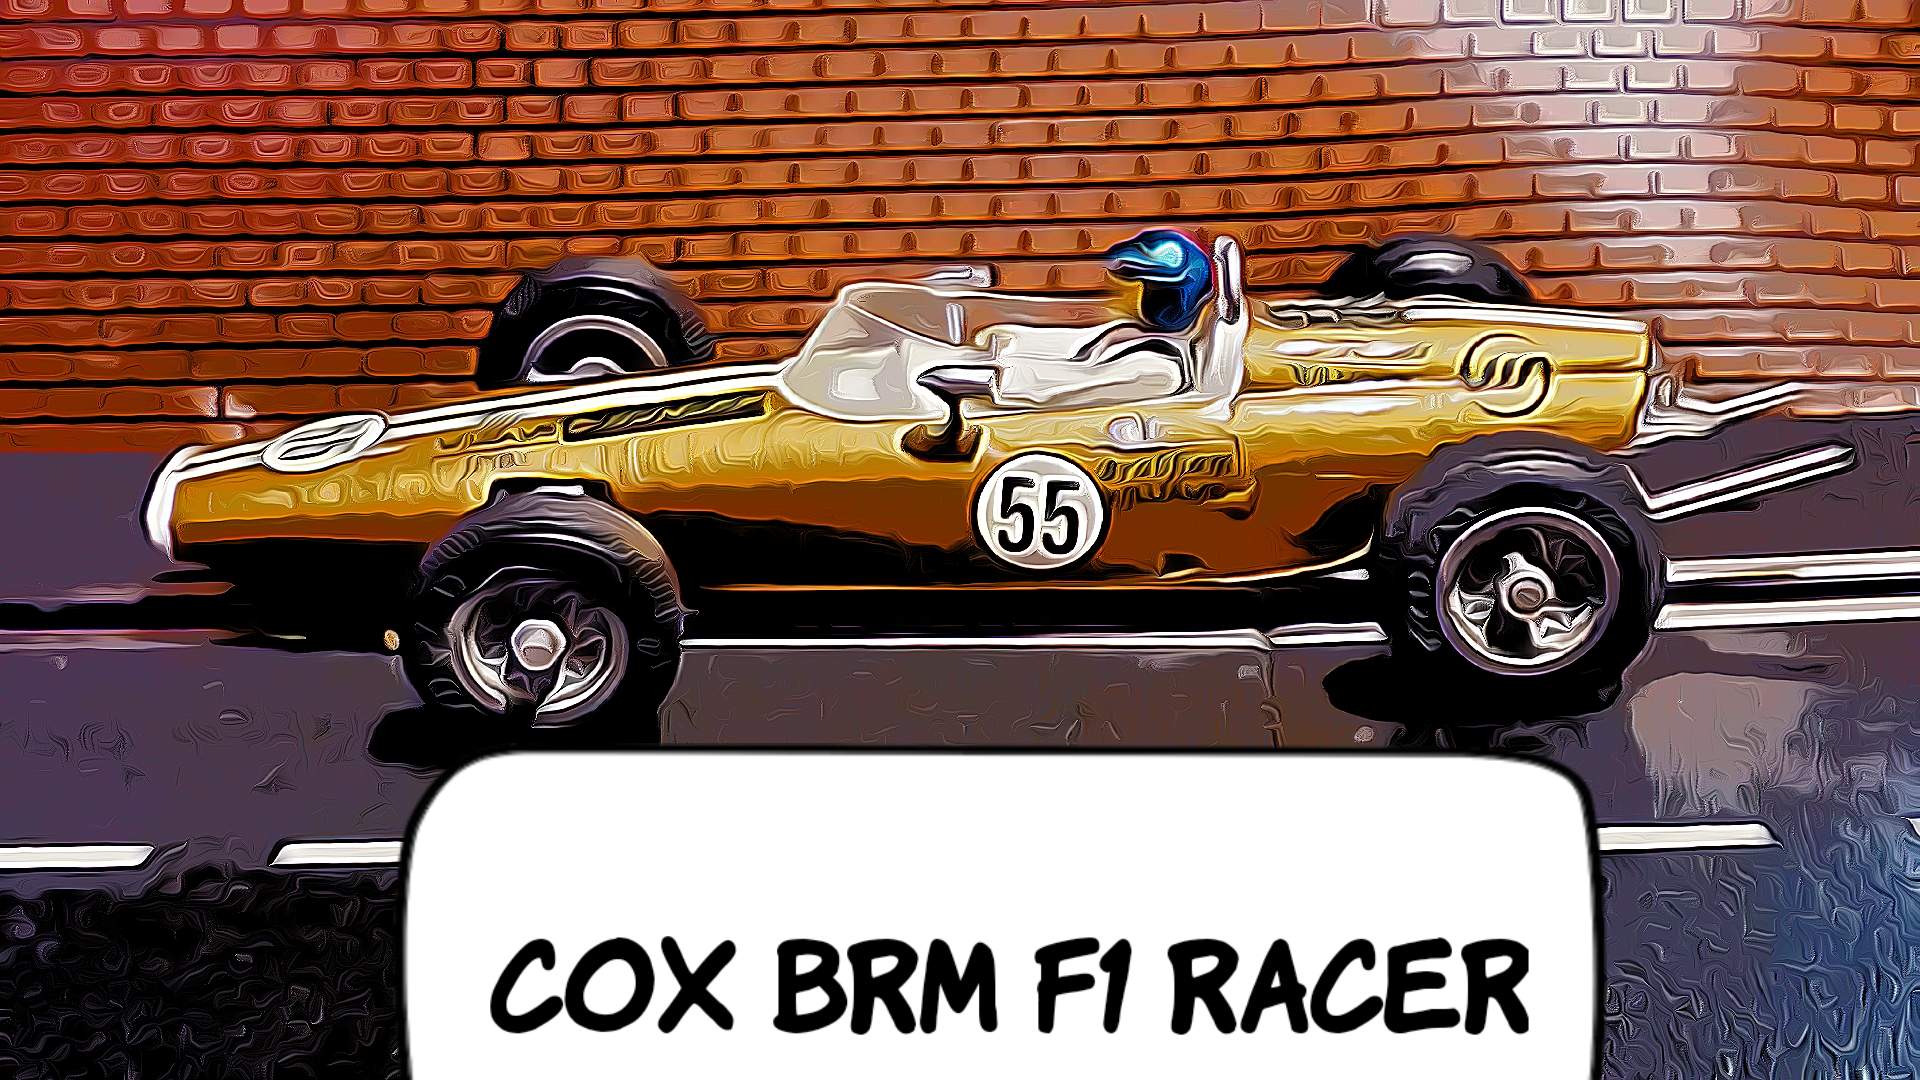 * SOLD 02-28-23 * *1st SALE ITEM of 2023, BUY IT NOW & SAVE vs. our Ebay Store* Vintage COX BRM F1 Slot Car #55 1/24 Scale in Bronze